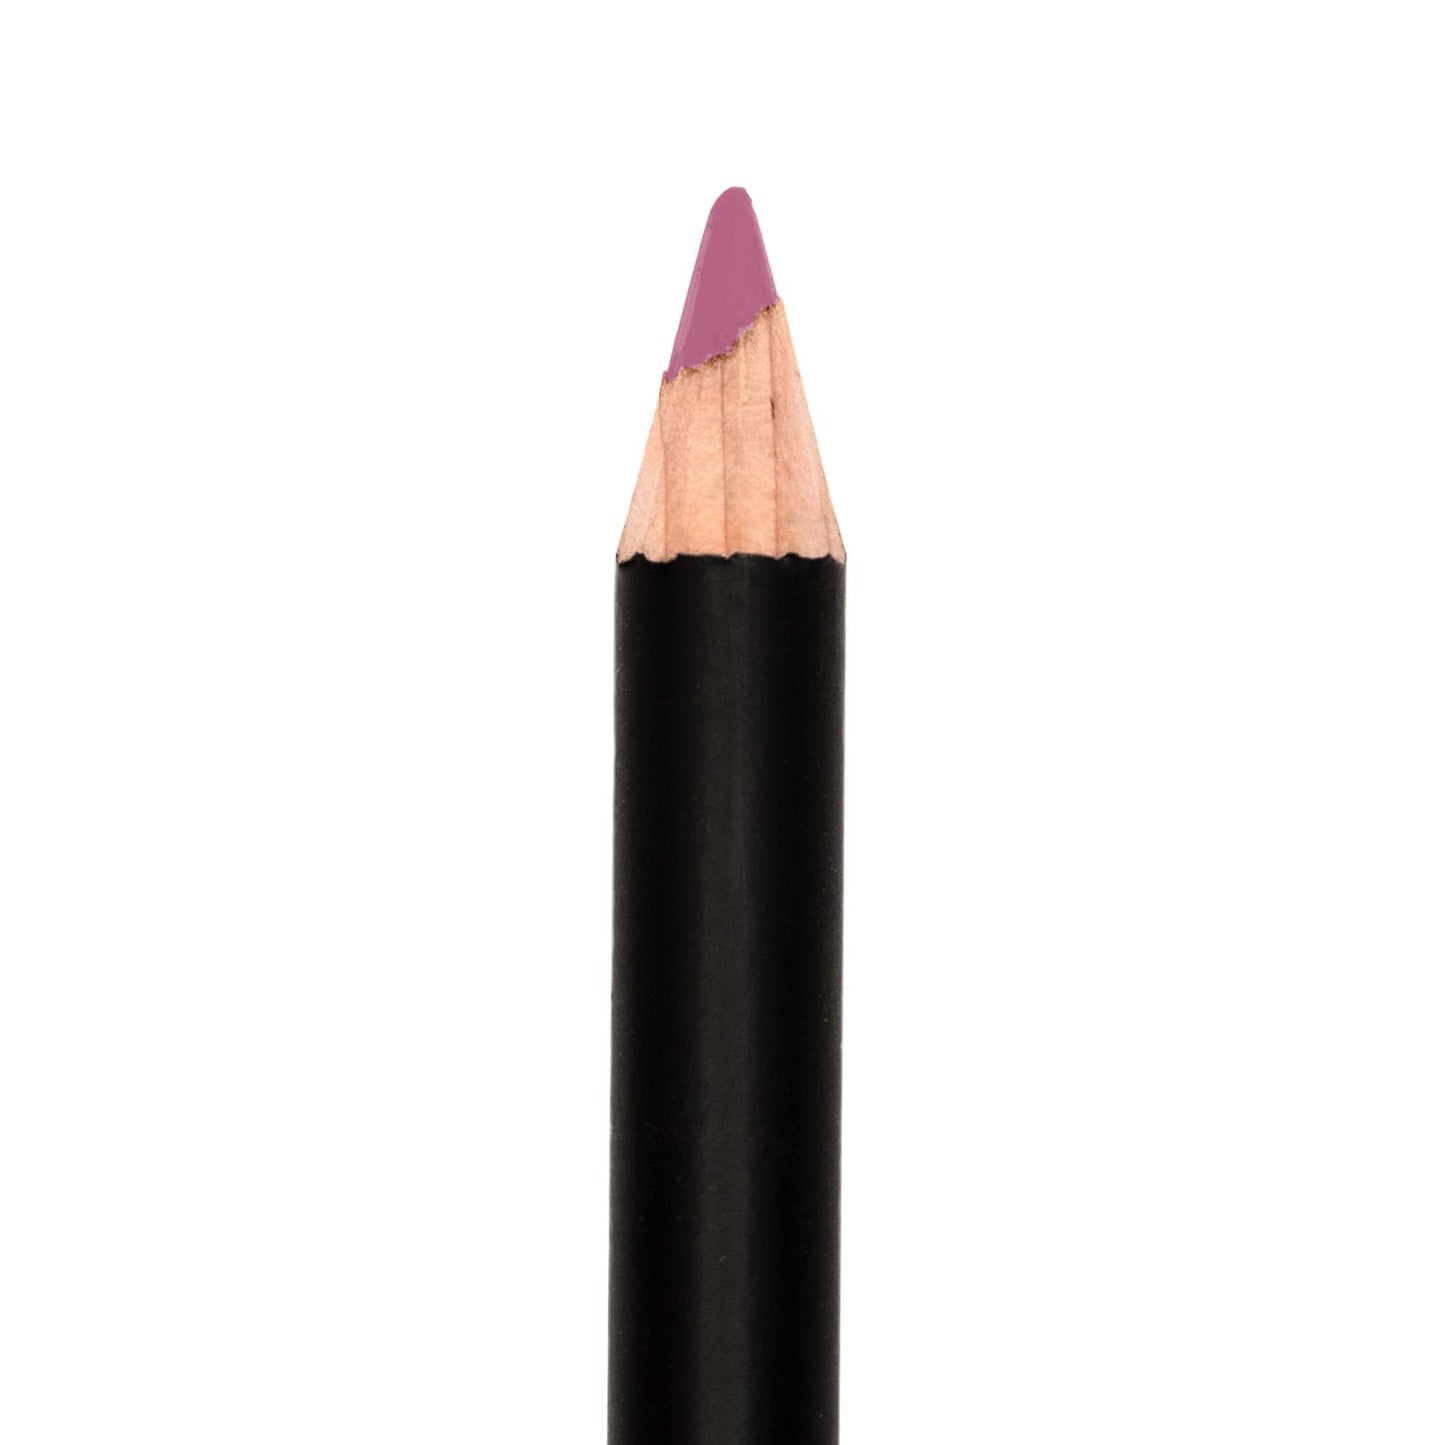 Lip Pencil in Roseate from Cruisin Organics.  Like something that's kind of dusty, pink, almost purplish. "the pink glow at first light."  Pink pencil for stunning lip color and rose-hued chromatic lines. 